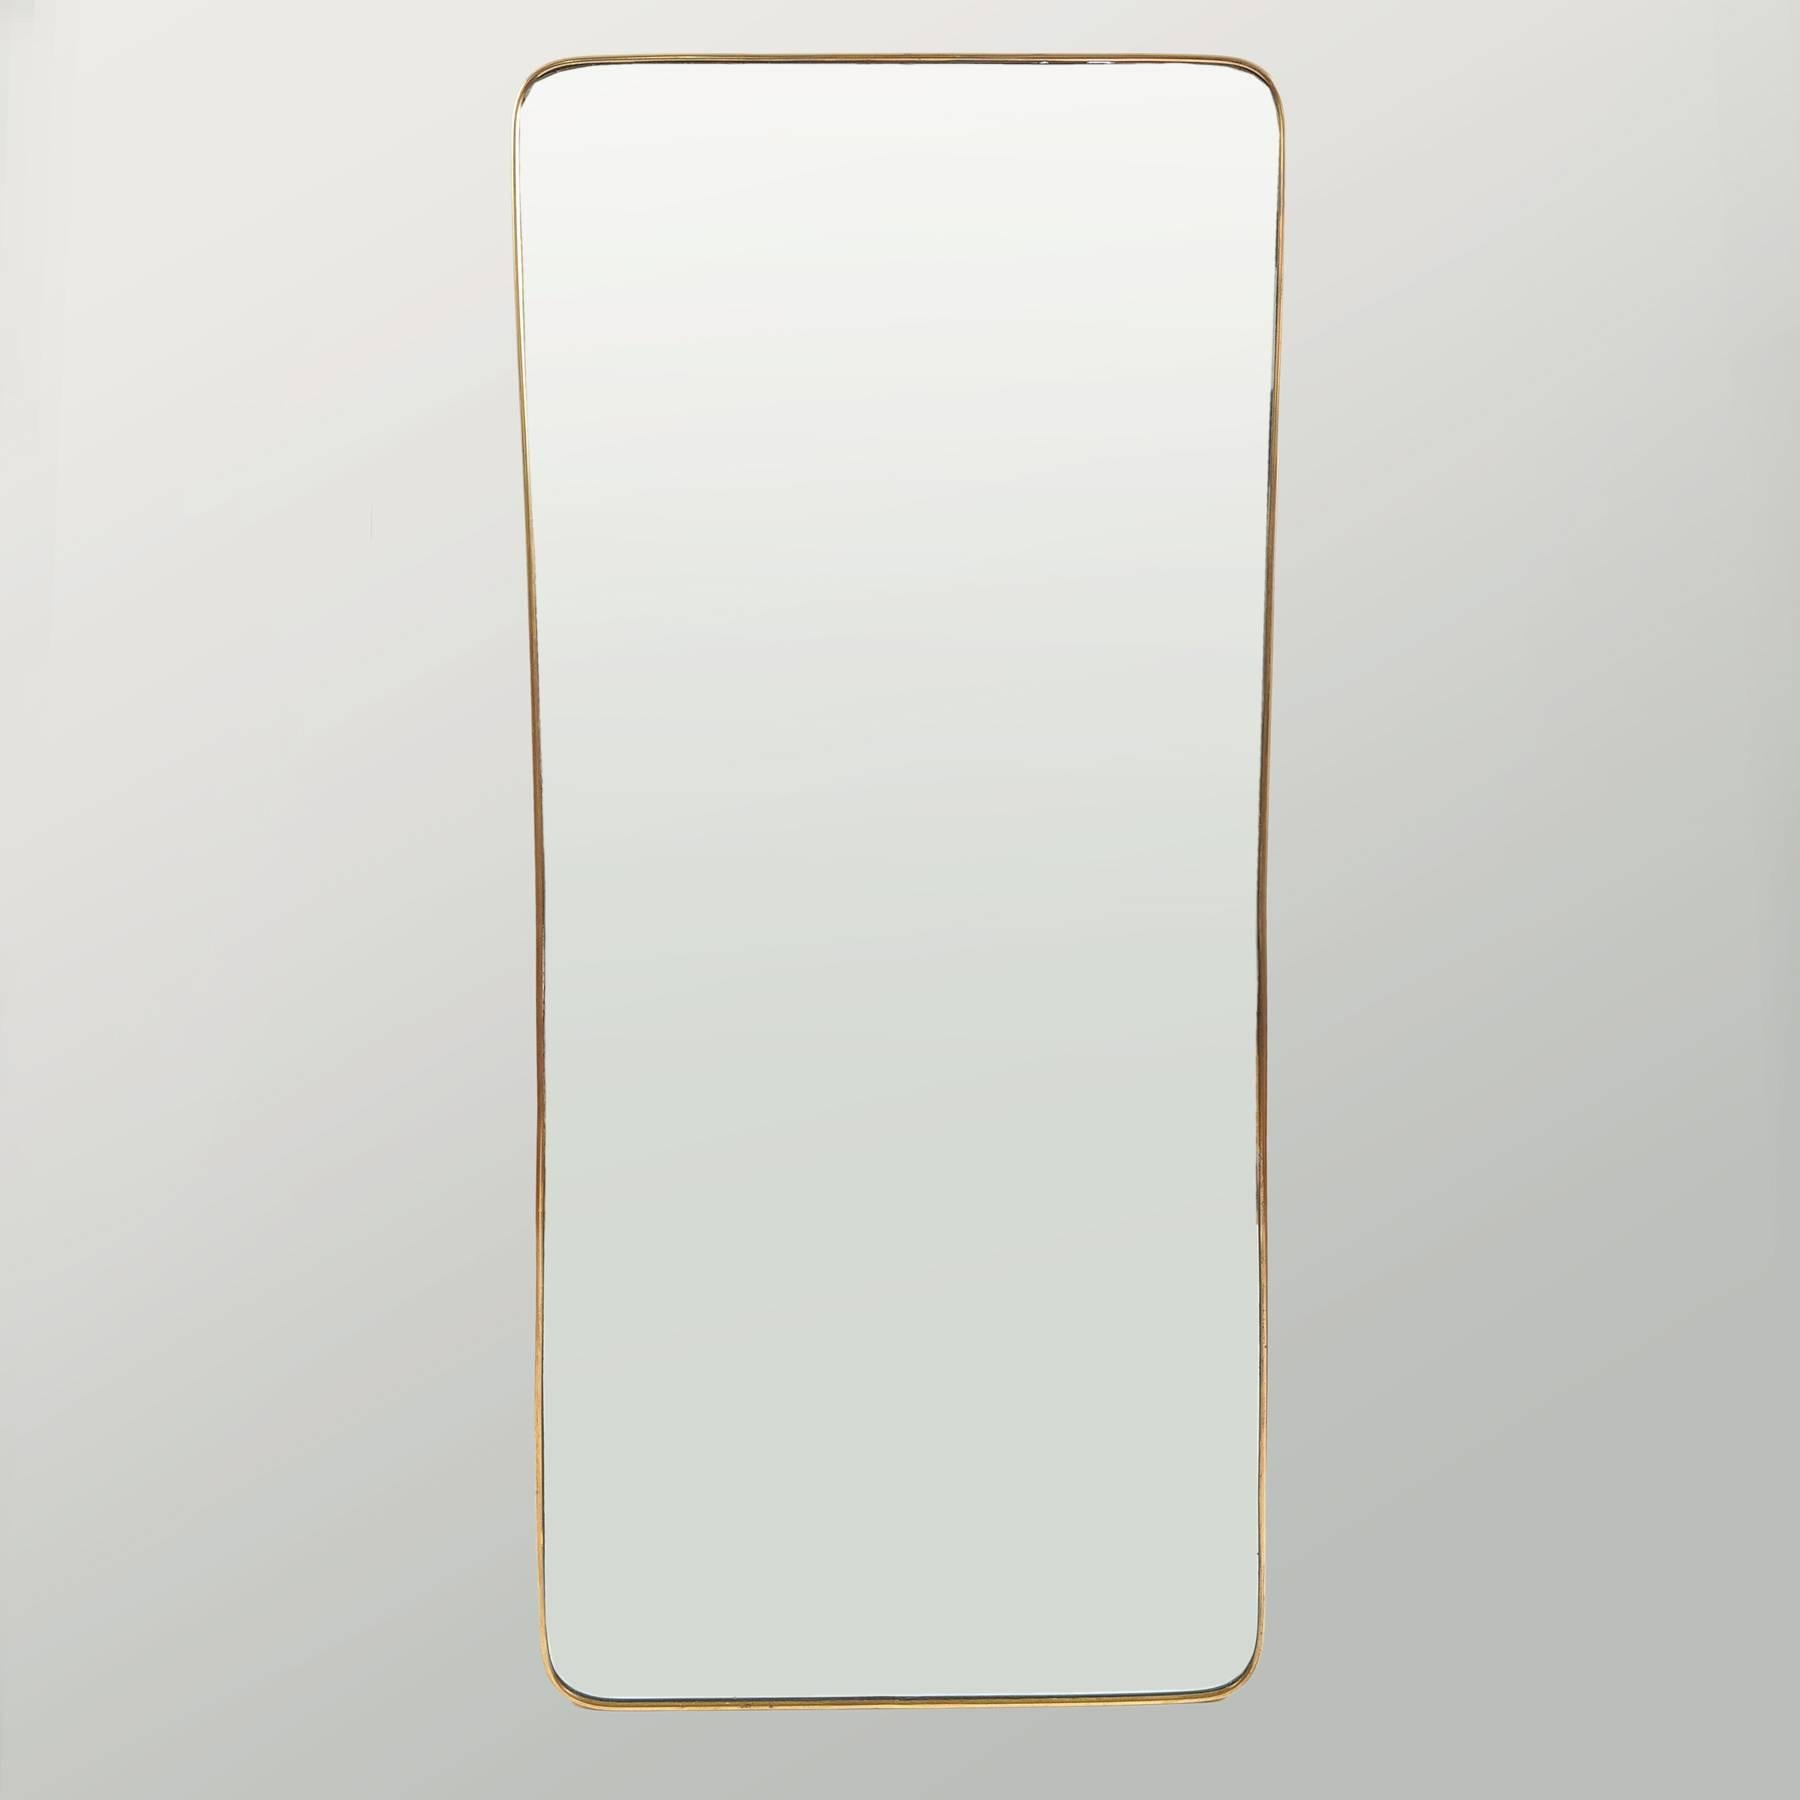 Tall Italian 1950s shaped mirror, with subtle narrowing in the middle. A thin brass frame surrounds the original mirror etched with a deep 3cm bevel.